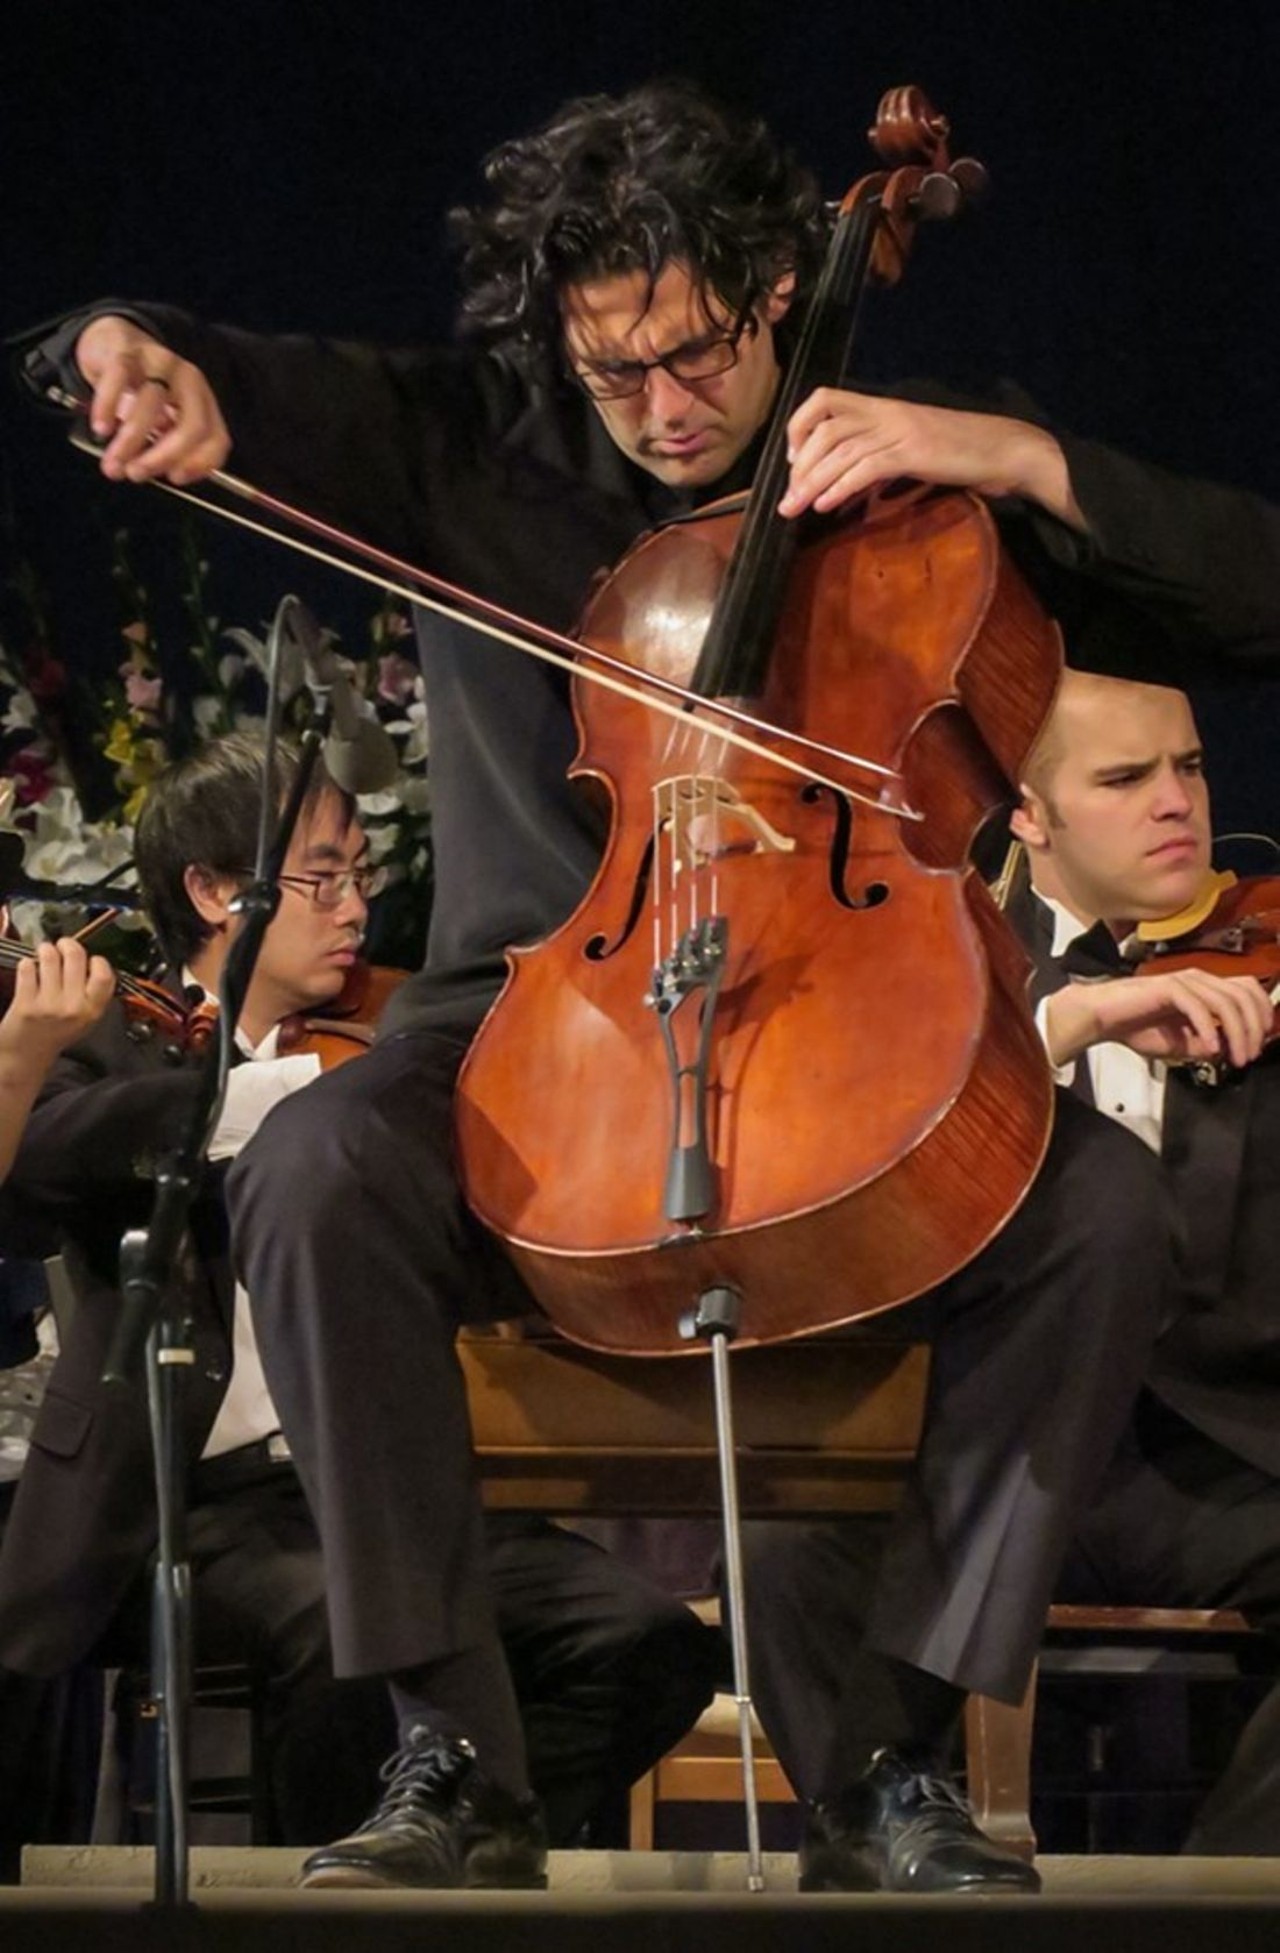 CityMusic Cleveland with Cellist Amit Peled
Wed, May 15-Sun, May 19
Photo by Leonid Novoselov